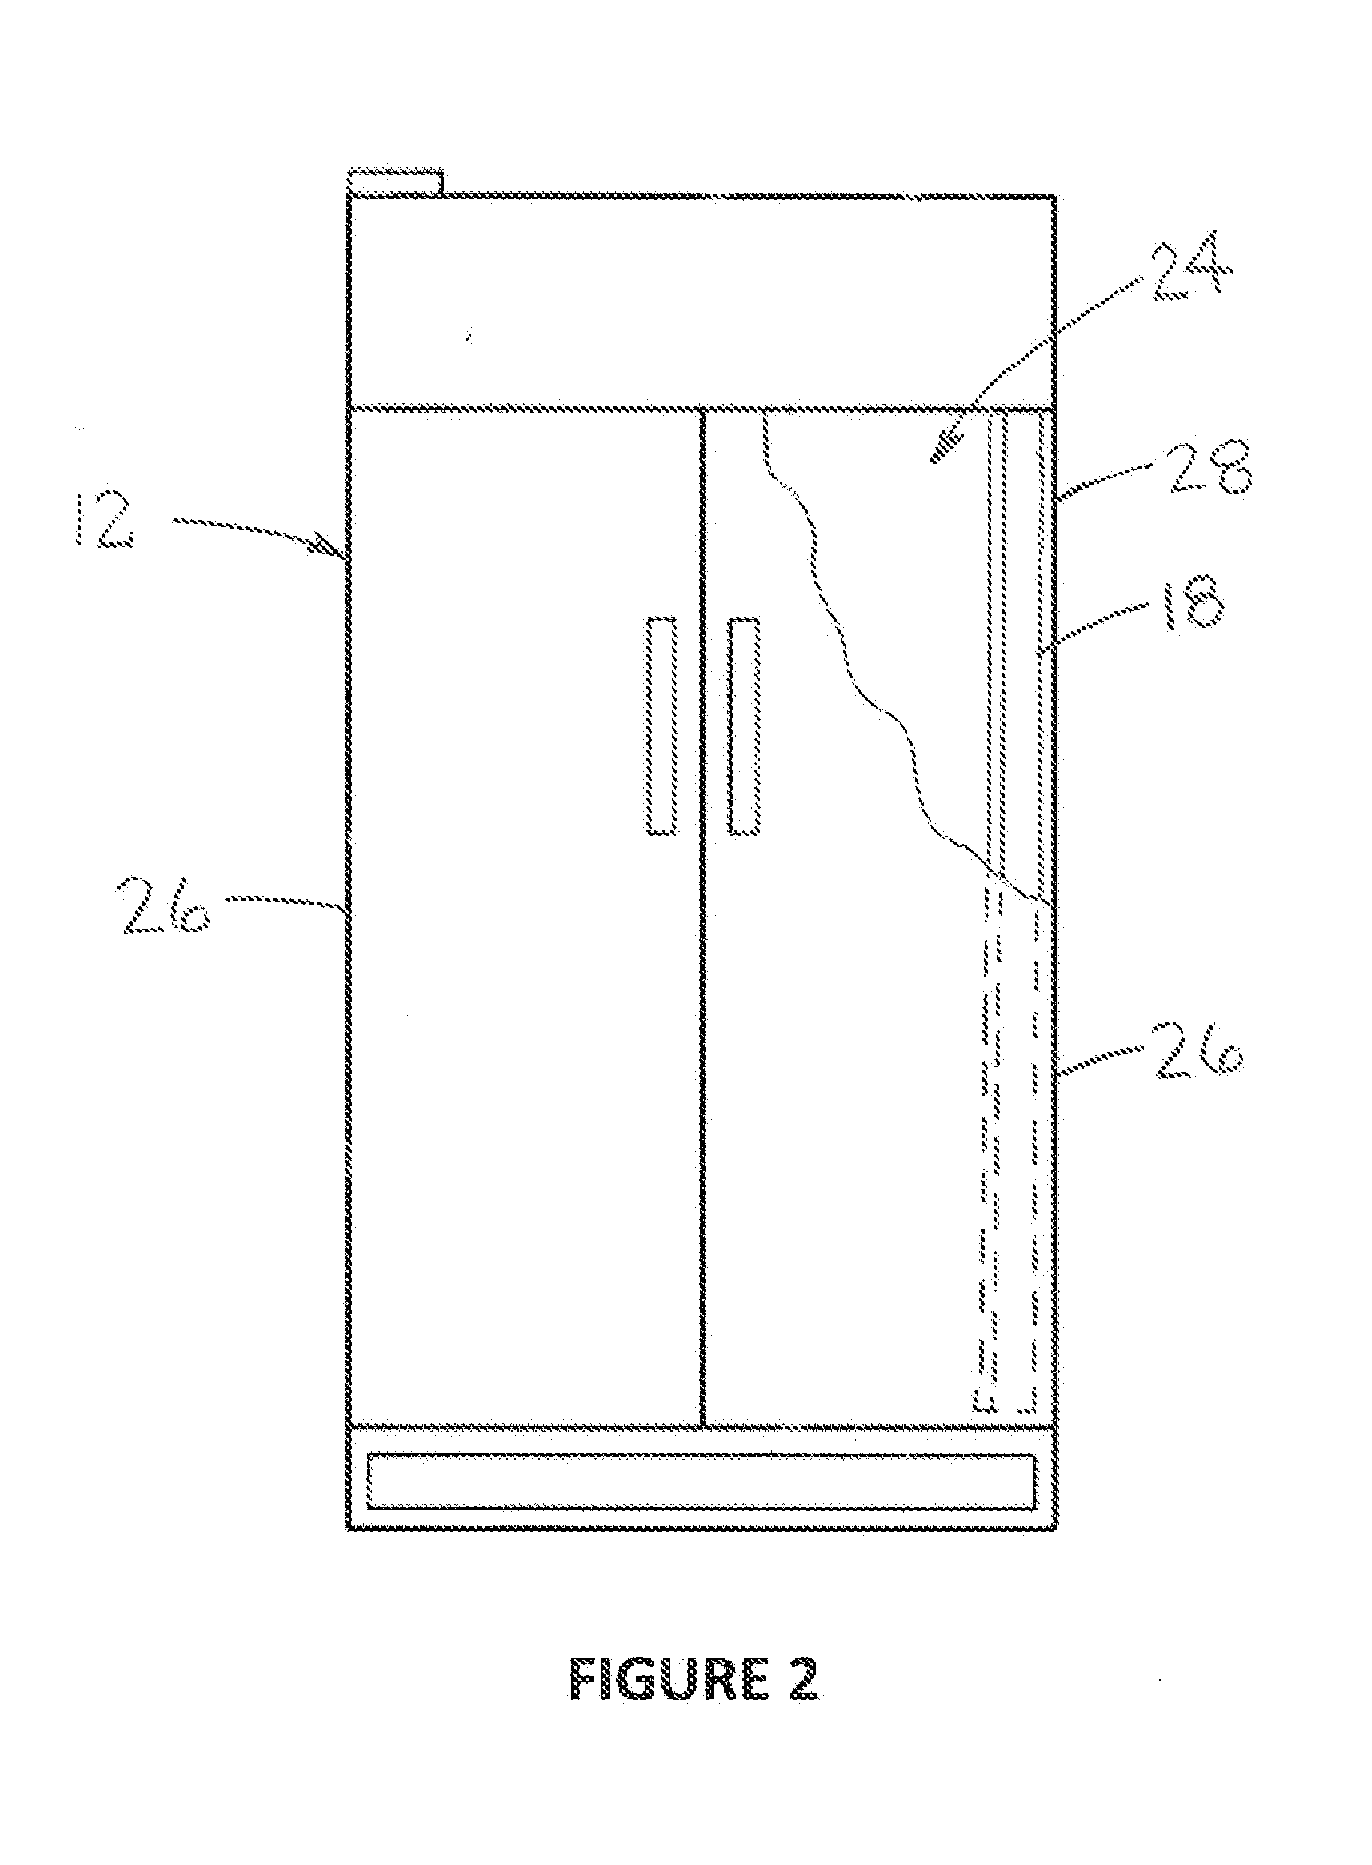 System for Facilitating Communication of Information and Related Methods